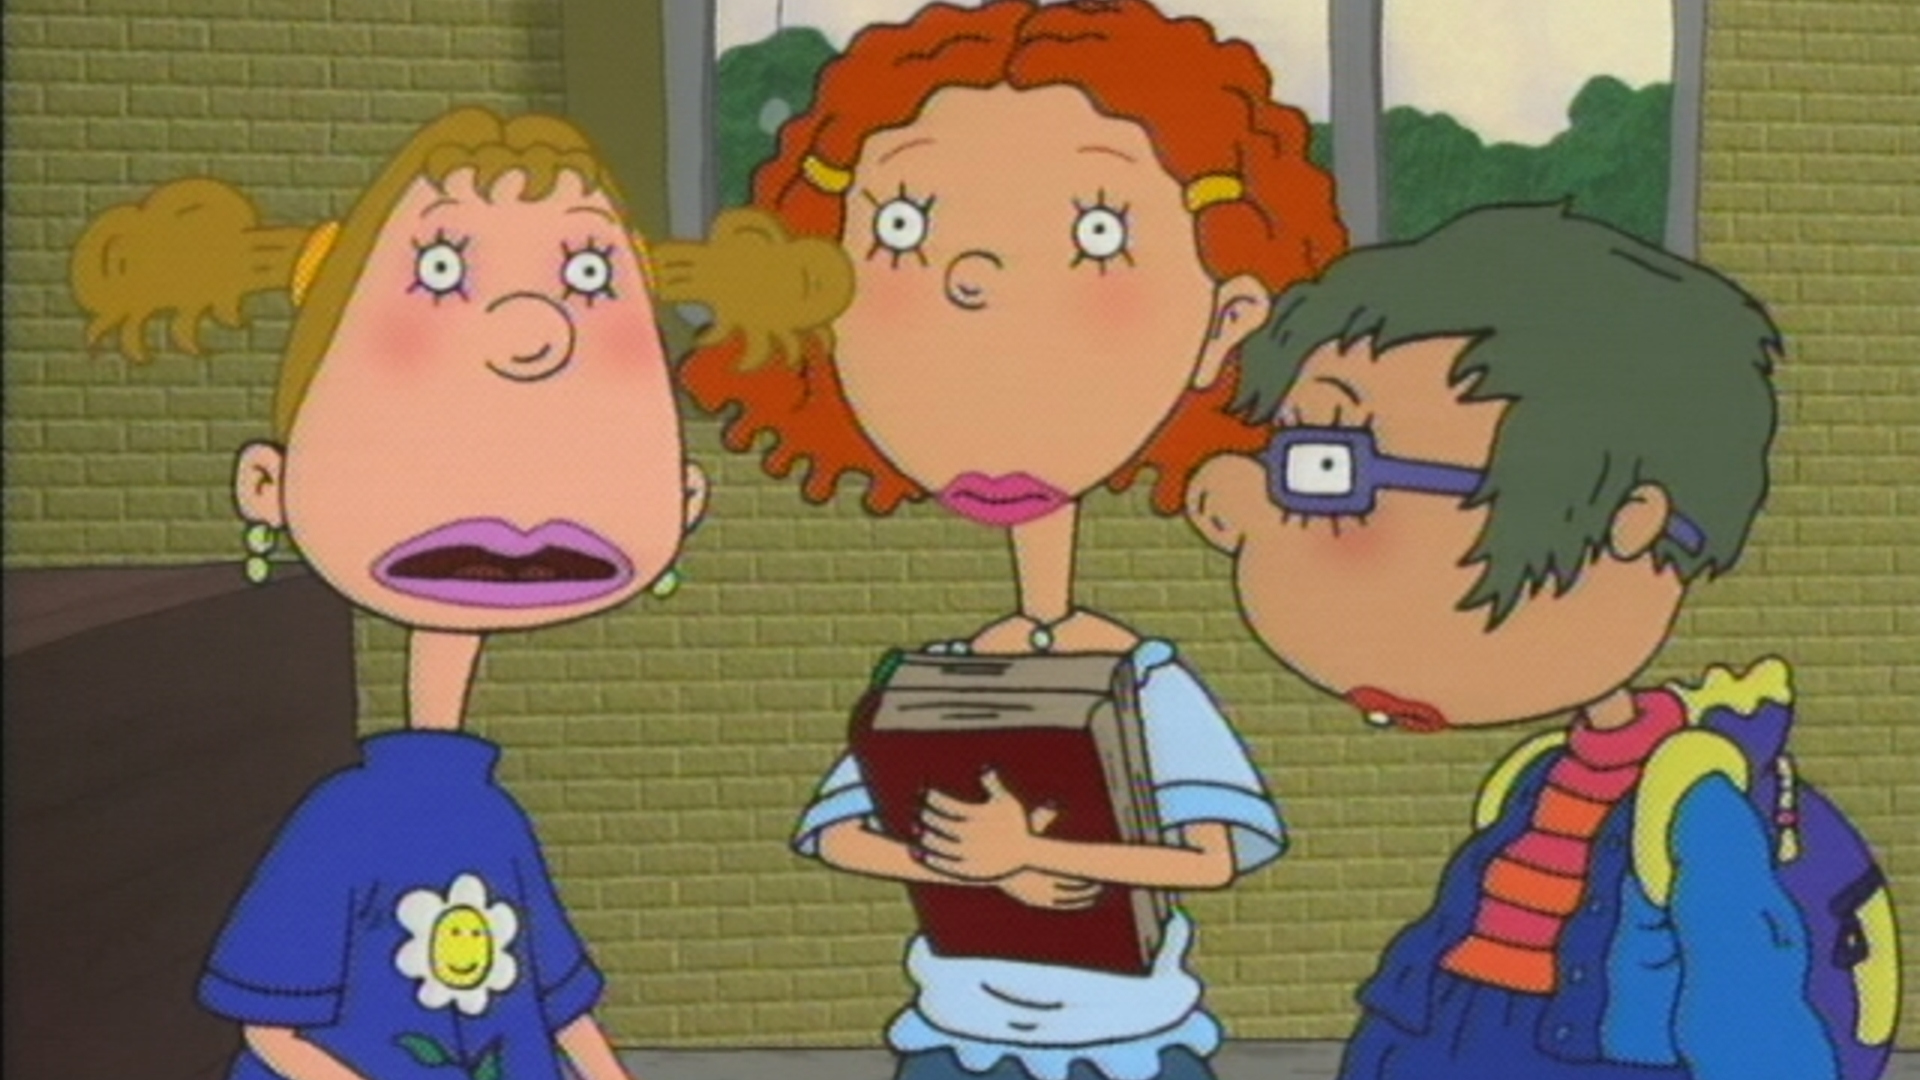 Watch As Told By Ginger Season 1 Episode 5 Of Lice And Friends Full Show On Paramount Plus 